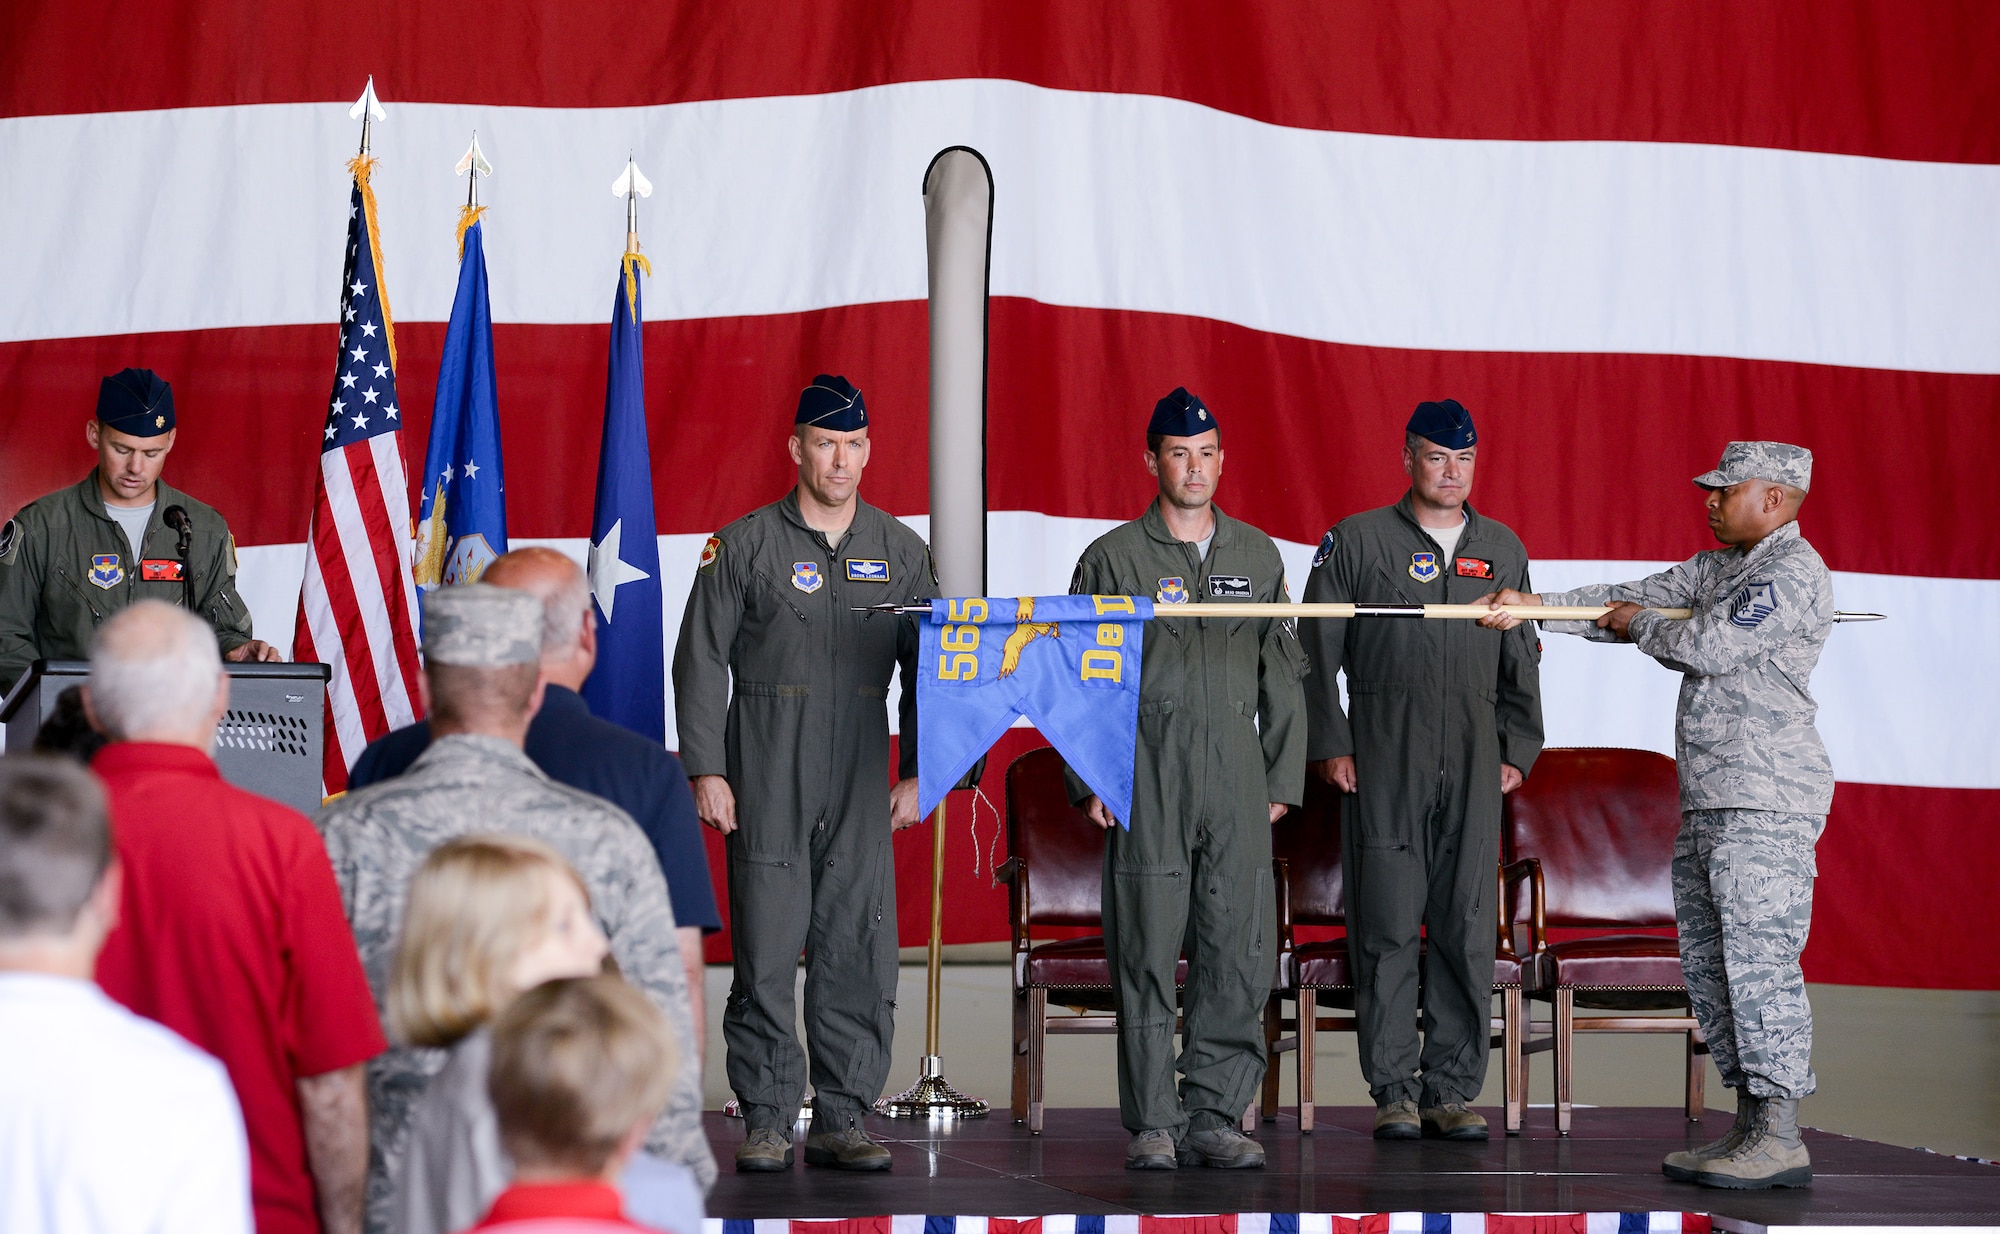 U.S. Air Force members from the 173rd Fighter Wing and 550th Fighter Squadron, stand at attention as the Detachment 2 flag is rolled up during an activation ceremony, July 21, 2017, at Kingsley Field in Klamath Falls, Oregon. The active duty Air Force detachment assigned to Kingsley Field, previously Detachment 2, is now officially designated as the 550th Fighter Squadron. 550th Fighter Squadron members will continue to fall under the command of the 56th Operations Group at Luke Air Force Base, Arizona. (U.S. Air National Guard photo by Staff Sgt. Penny Snoozy)